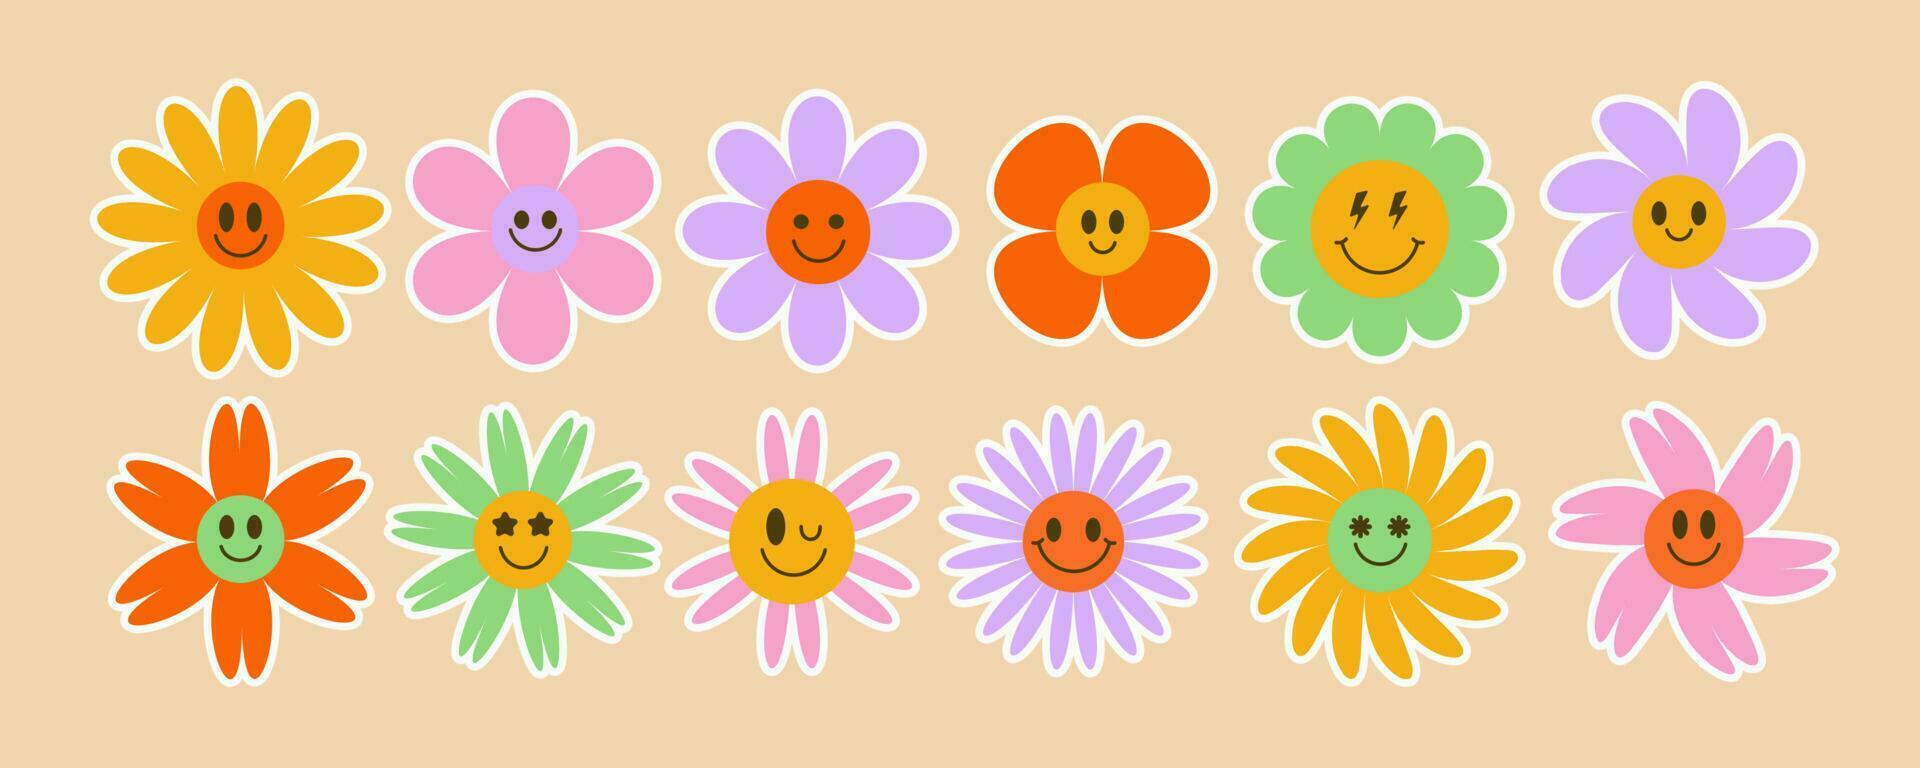 Daisy groovy flowers. Smiling retro floral faces. Y2k simple design. Cartoon chamomile character. Trendy vector illustration.